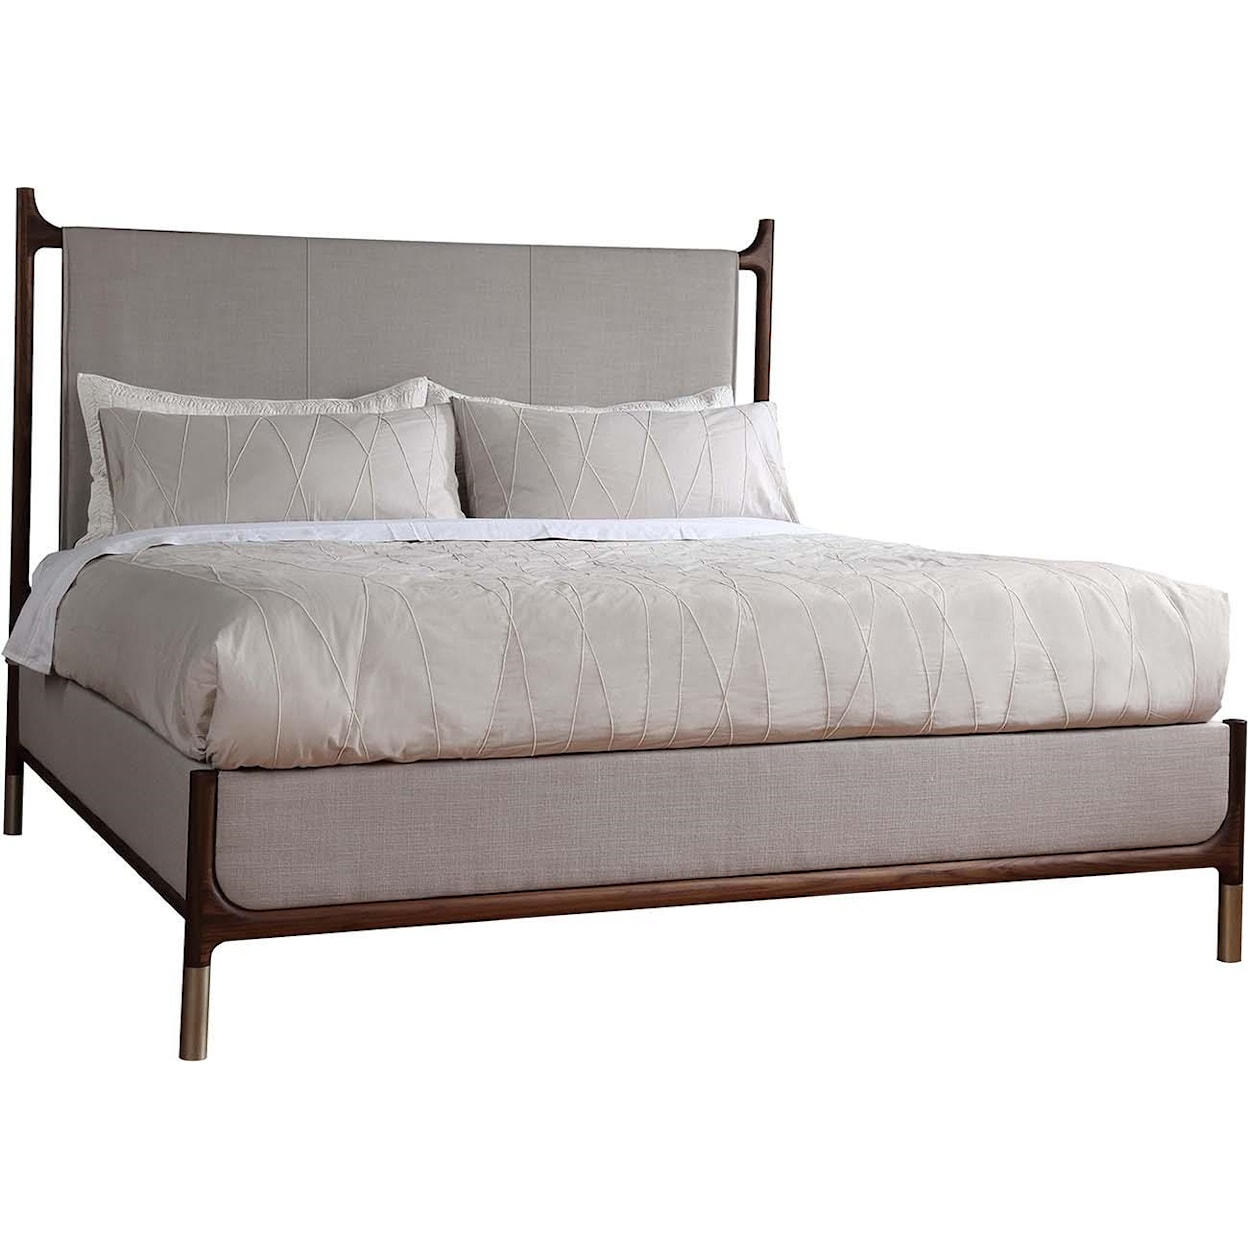 Stickley Walnut Grove Queen Leather Upholstered Bed